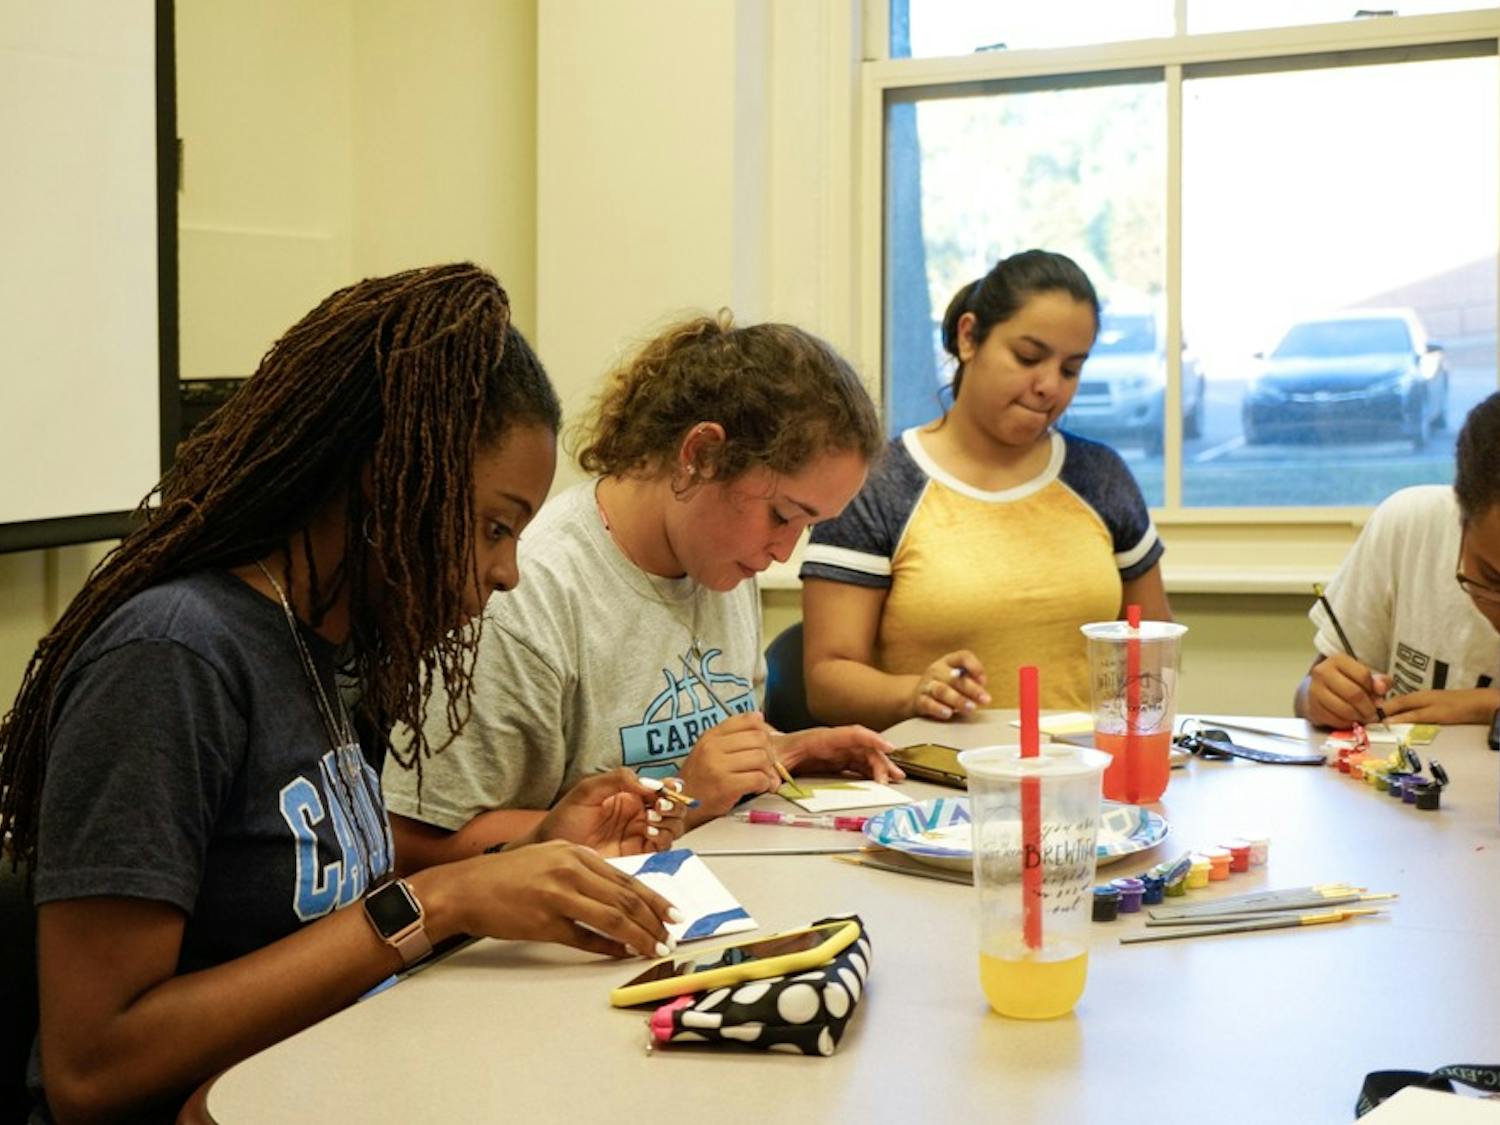 On September 23rd at the Carolina Latinx Center, students (left to right) Jadah Smith, Isabella Lima, Elena Delvalle, and Bianca Goodwin participate in "Paint My Latinidad" by each painting a visual representation of their latinidad. This event was one of many hosted by the Carolina Latinx Center as a way to celebrate Latin Heritage Month and raise conversations about Latinx culture.